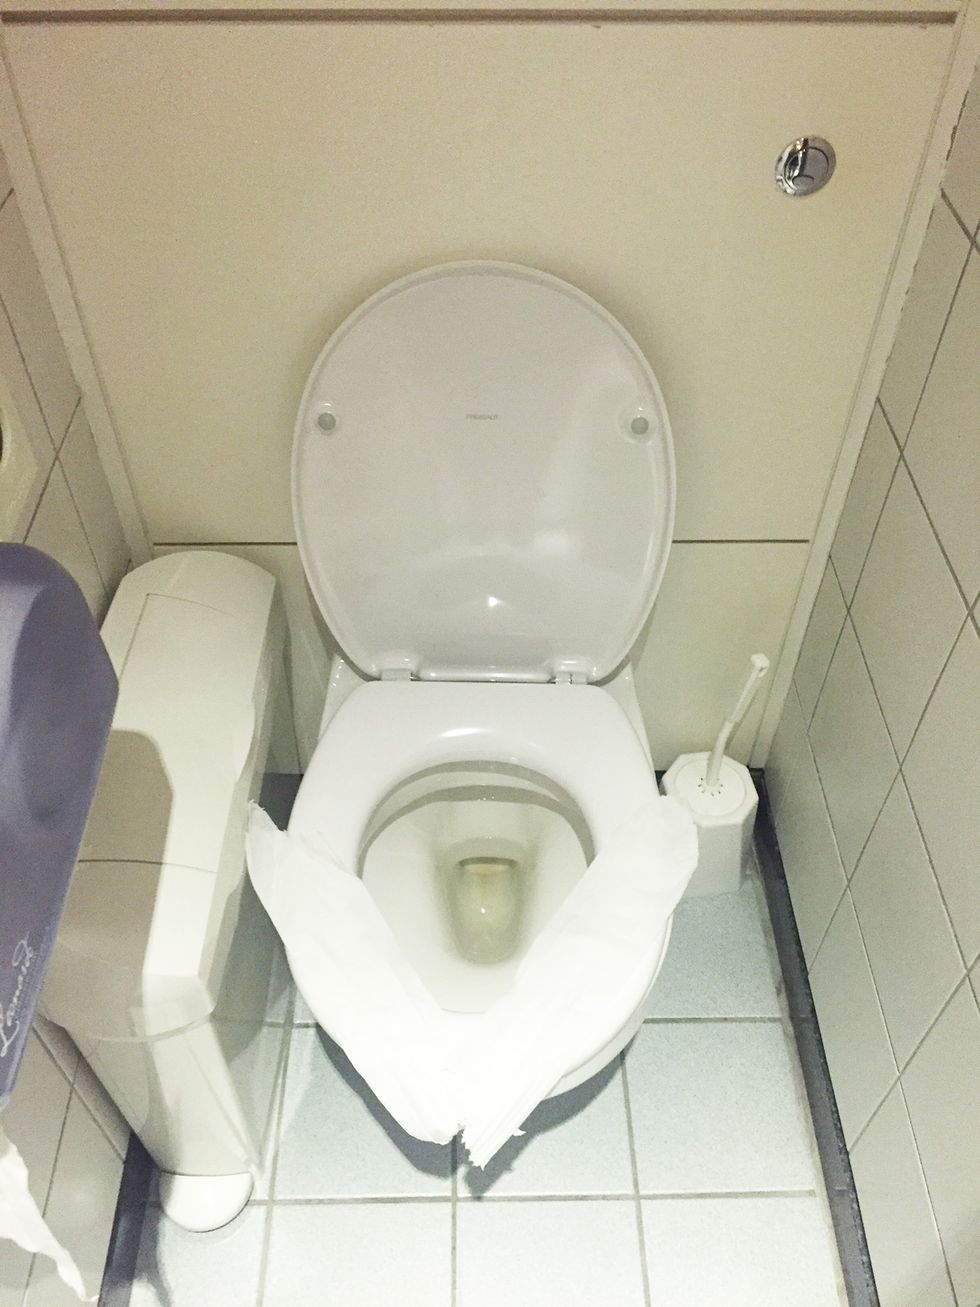 Have you ever covered the toilet seat with toilet roll before you go?